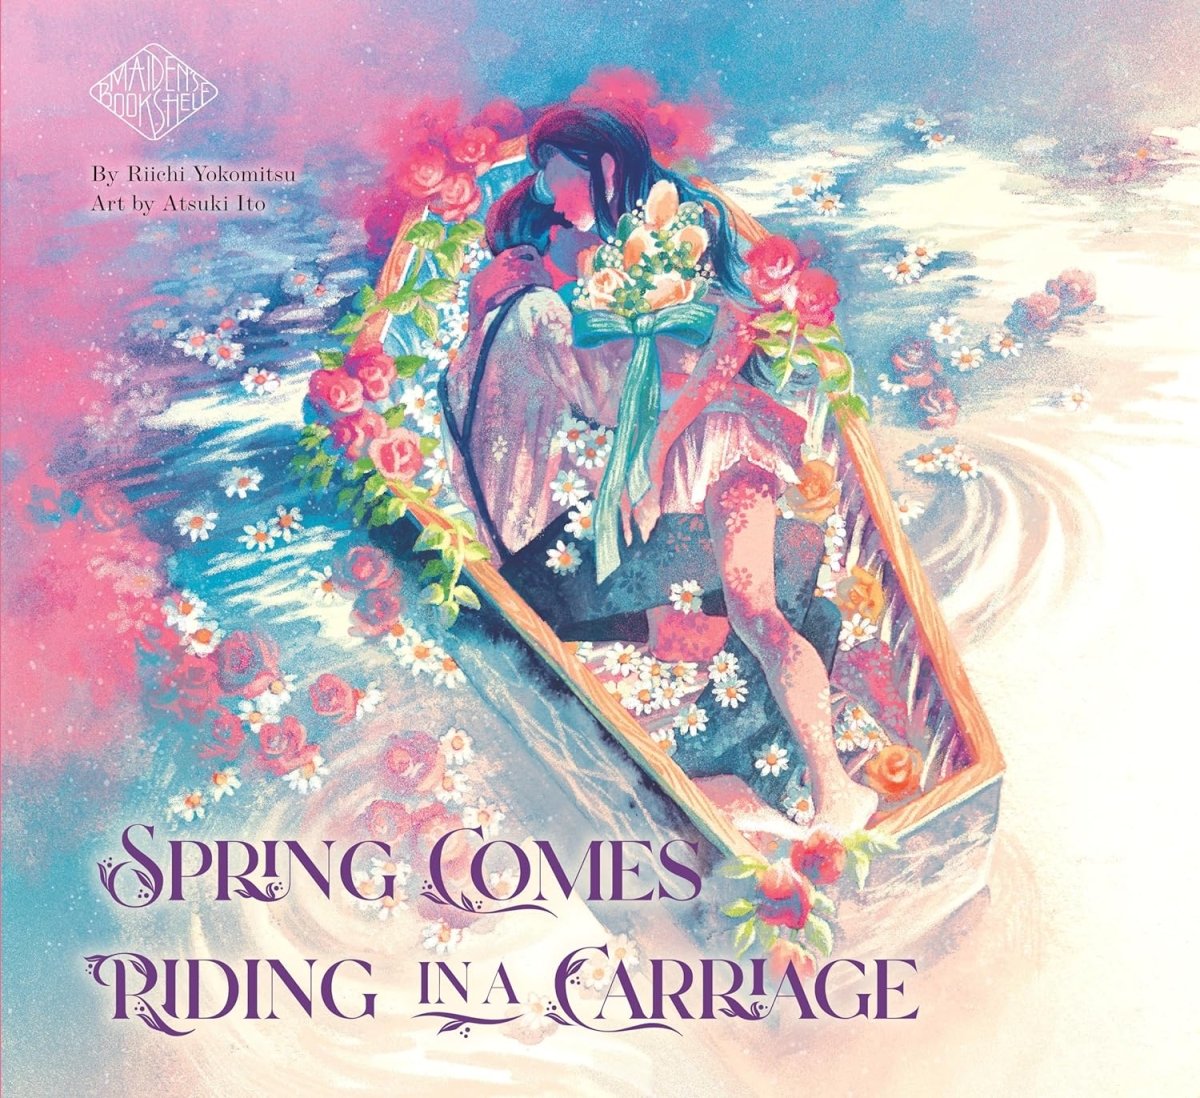 Spring Comes Riding In A Carriage: Maiden's Bookshelf HC - Walt's Comic Shop